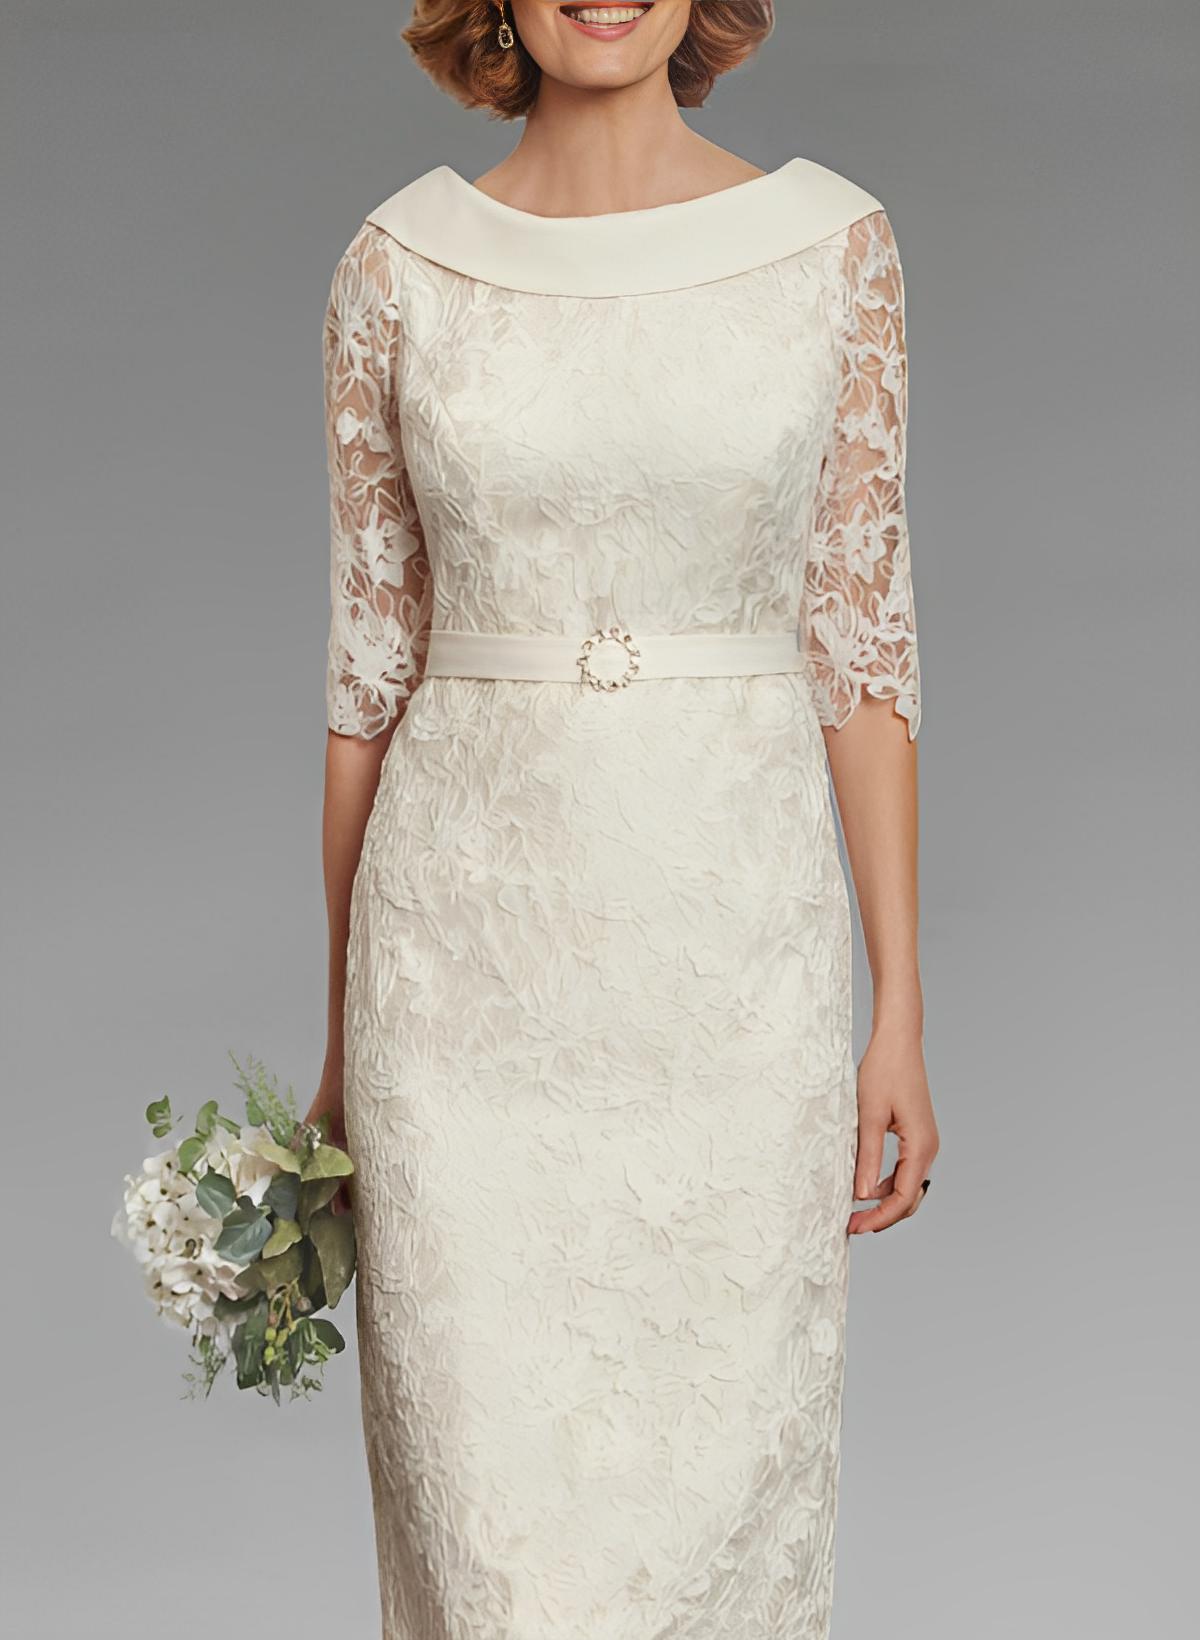 Sheath/Column Cowl Neck 1/2 Sleeves Lace Satin Knee-Length Mother Of The Bride Dresses With Beading